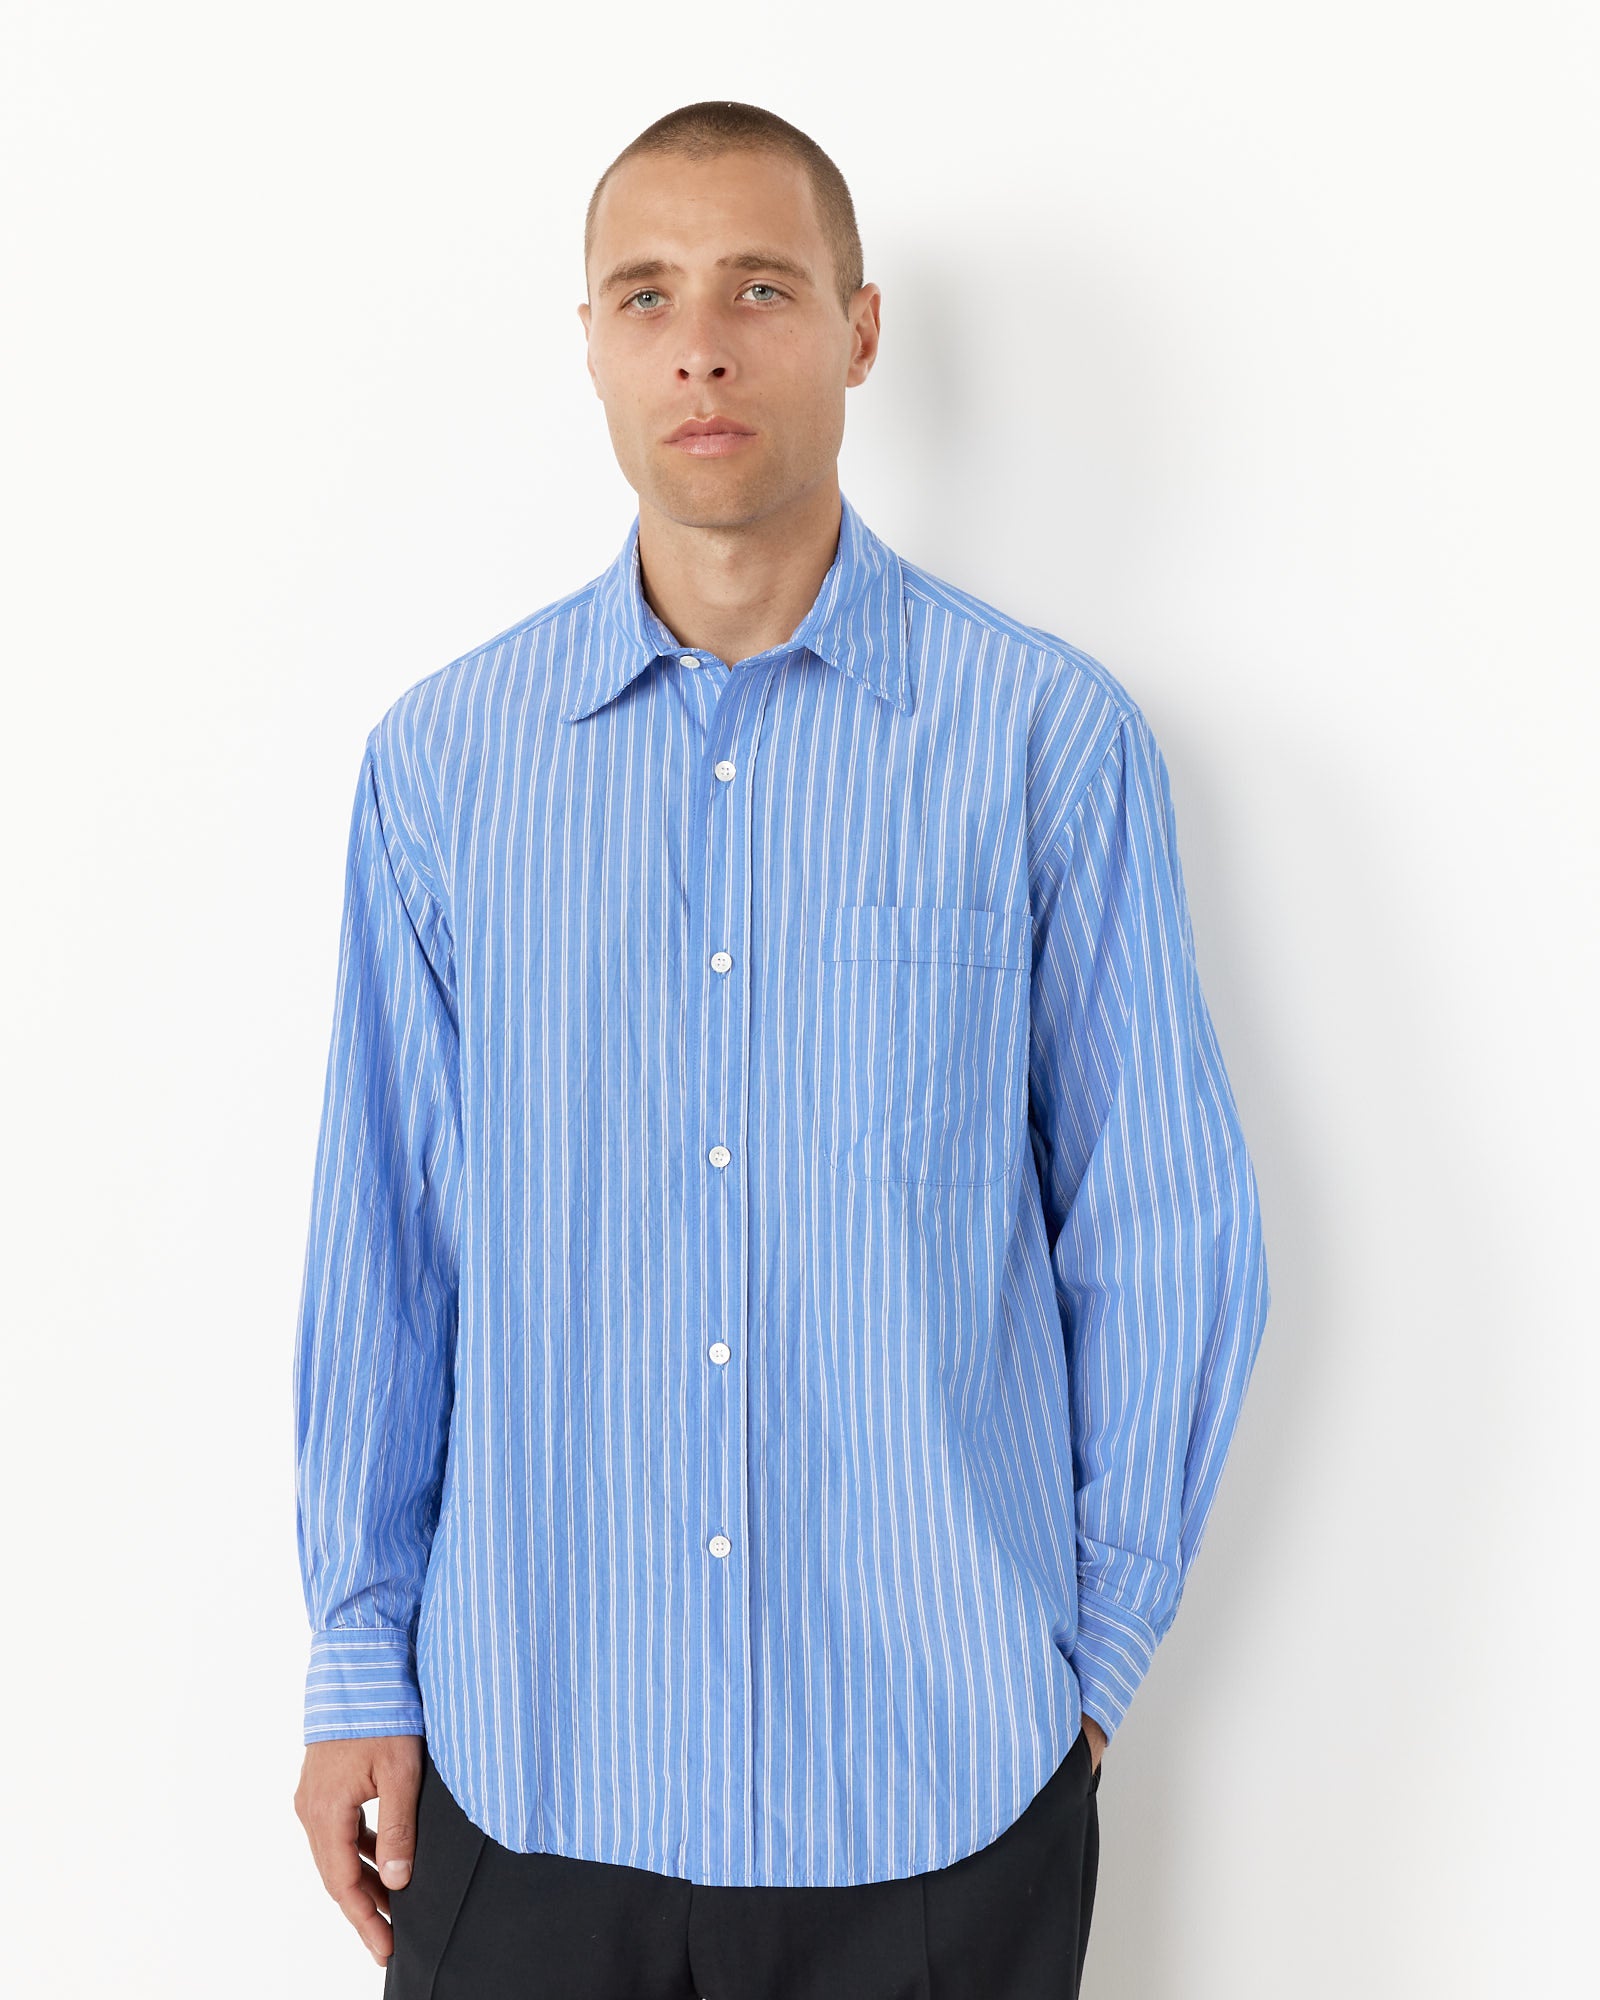 Gio Shirt in Crushed Cotton Blue Stripe